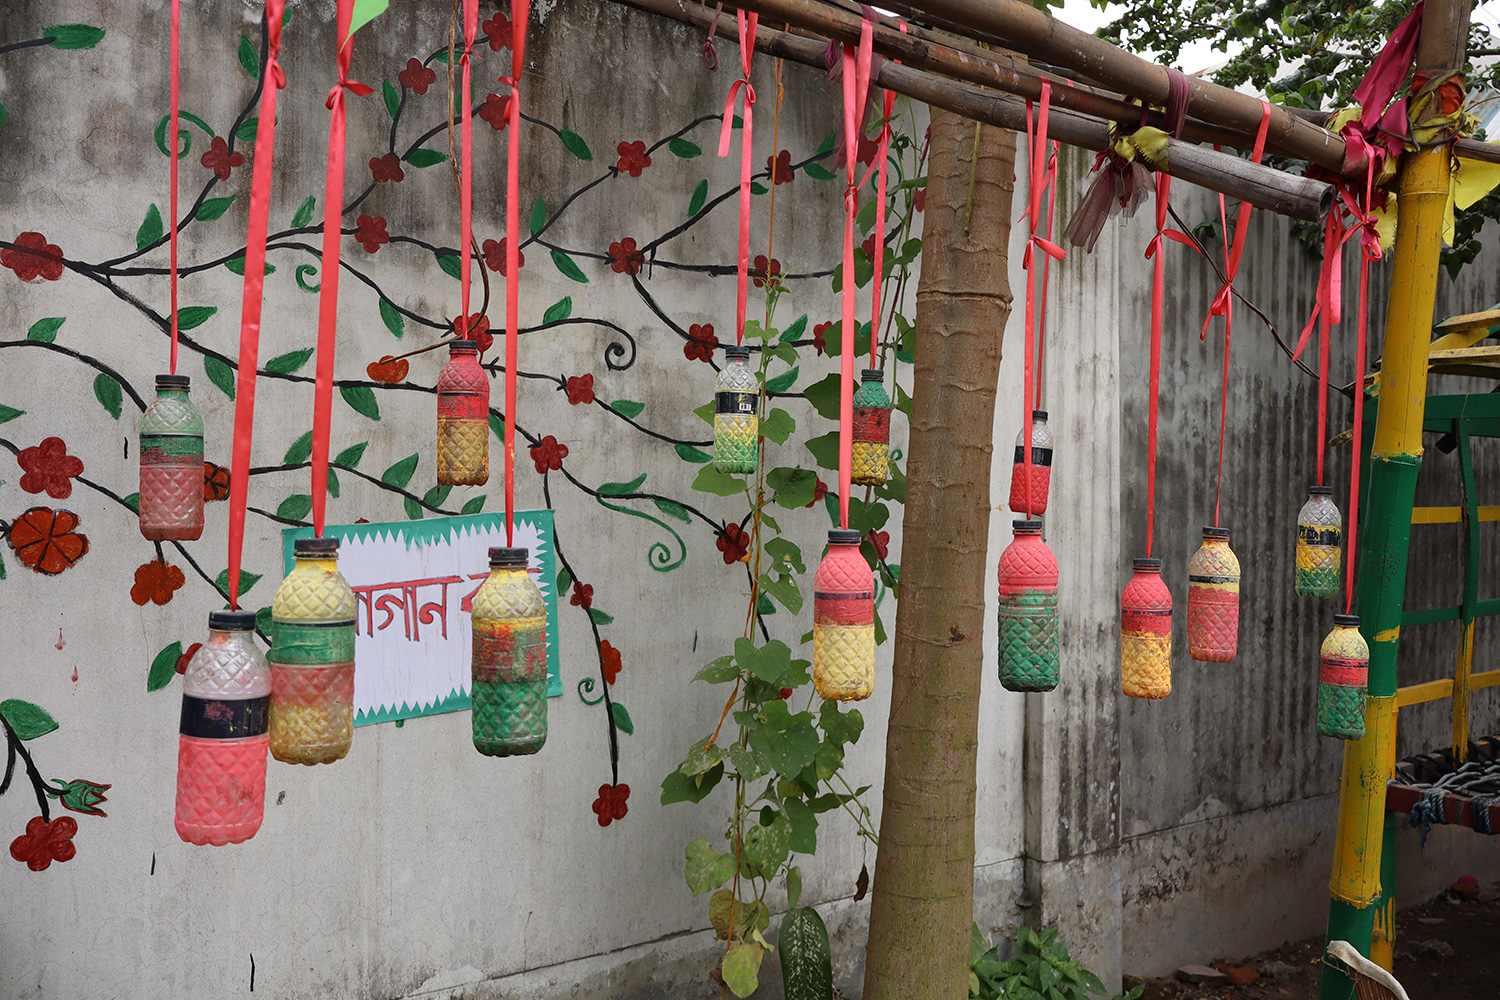 Outside a Play Lab in Dhaka, colorfully painted decorations made from water bottles and other recycled materials hang from the building.